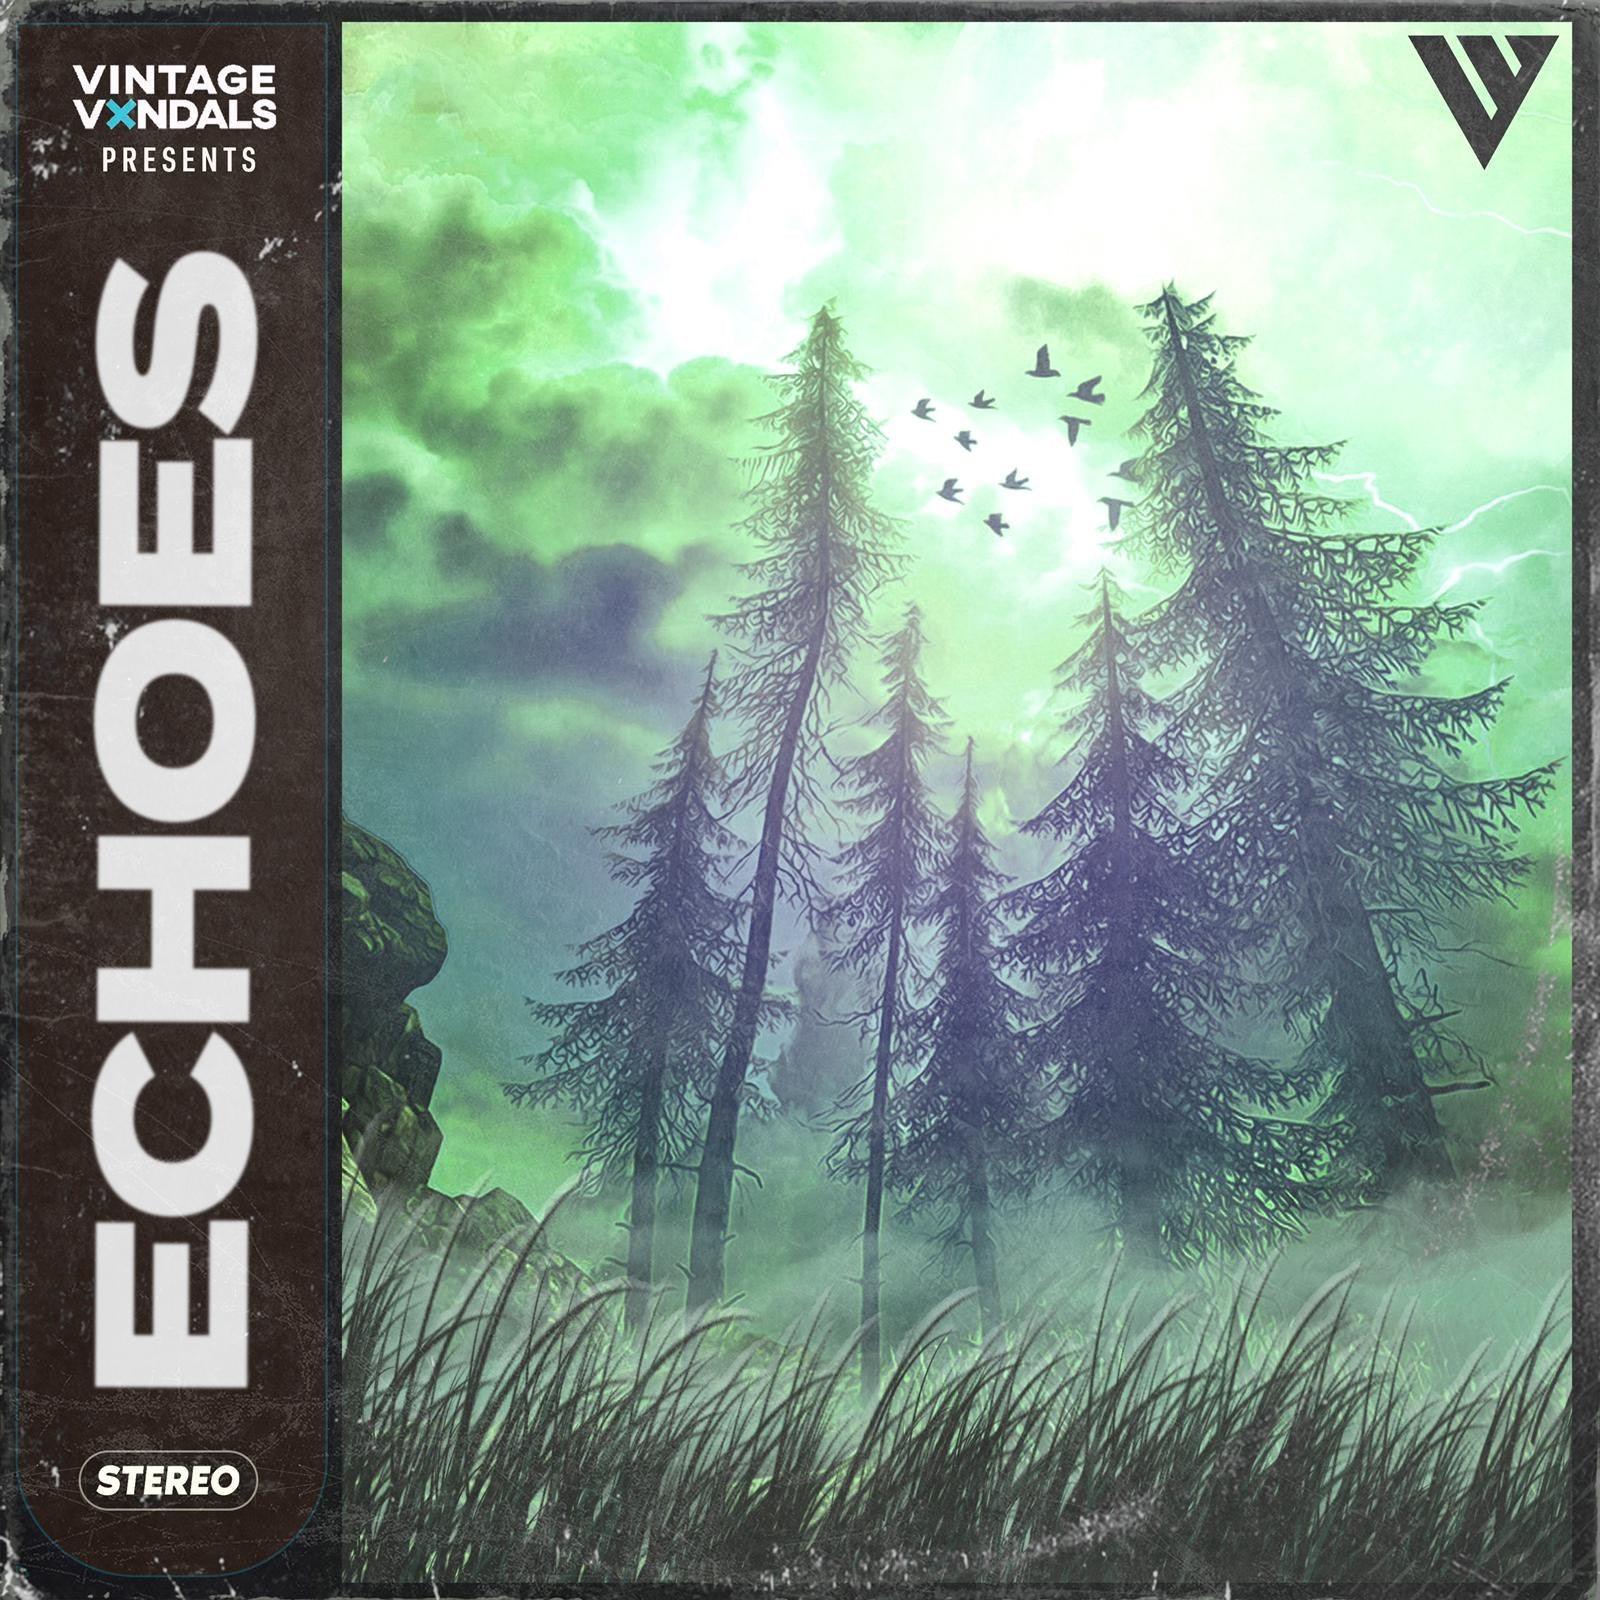 The Vintage Vxndals - Echoes - The Sample Lab